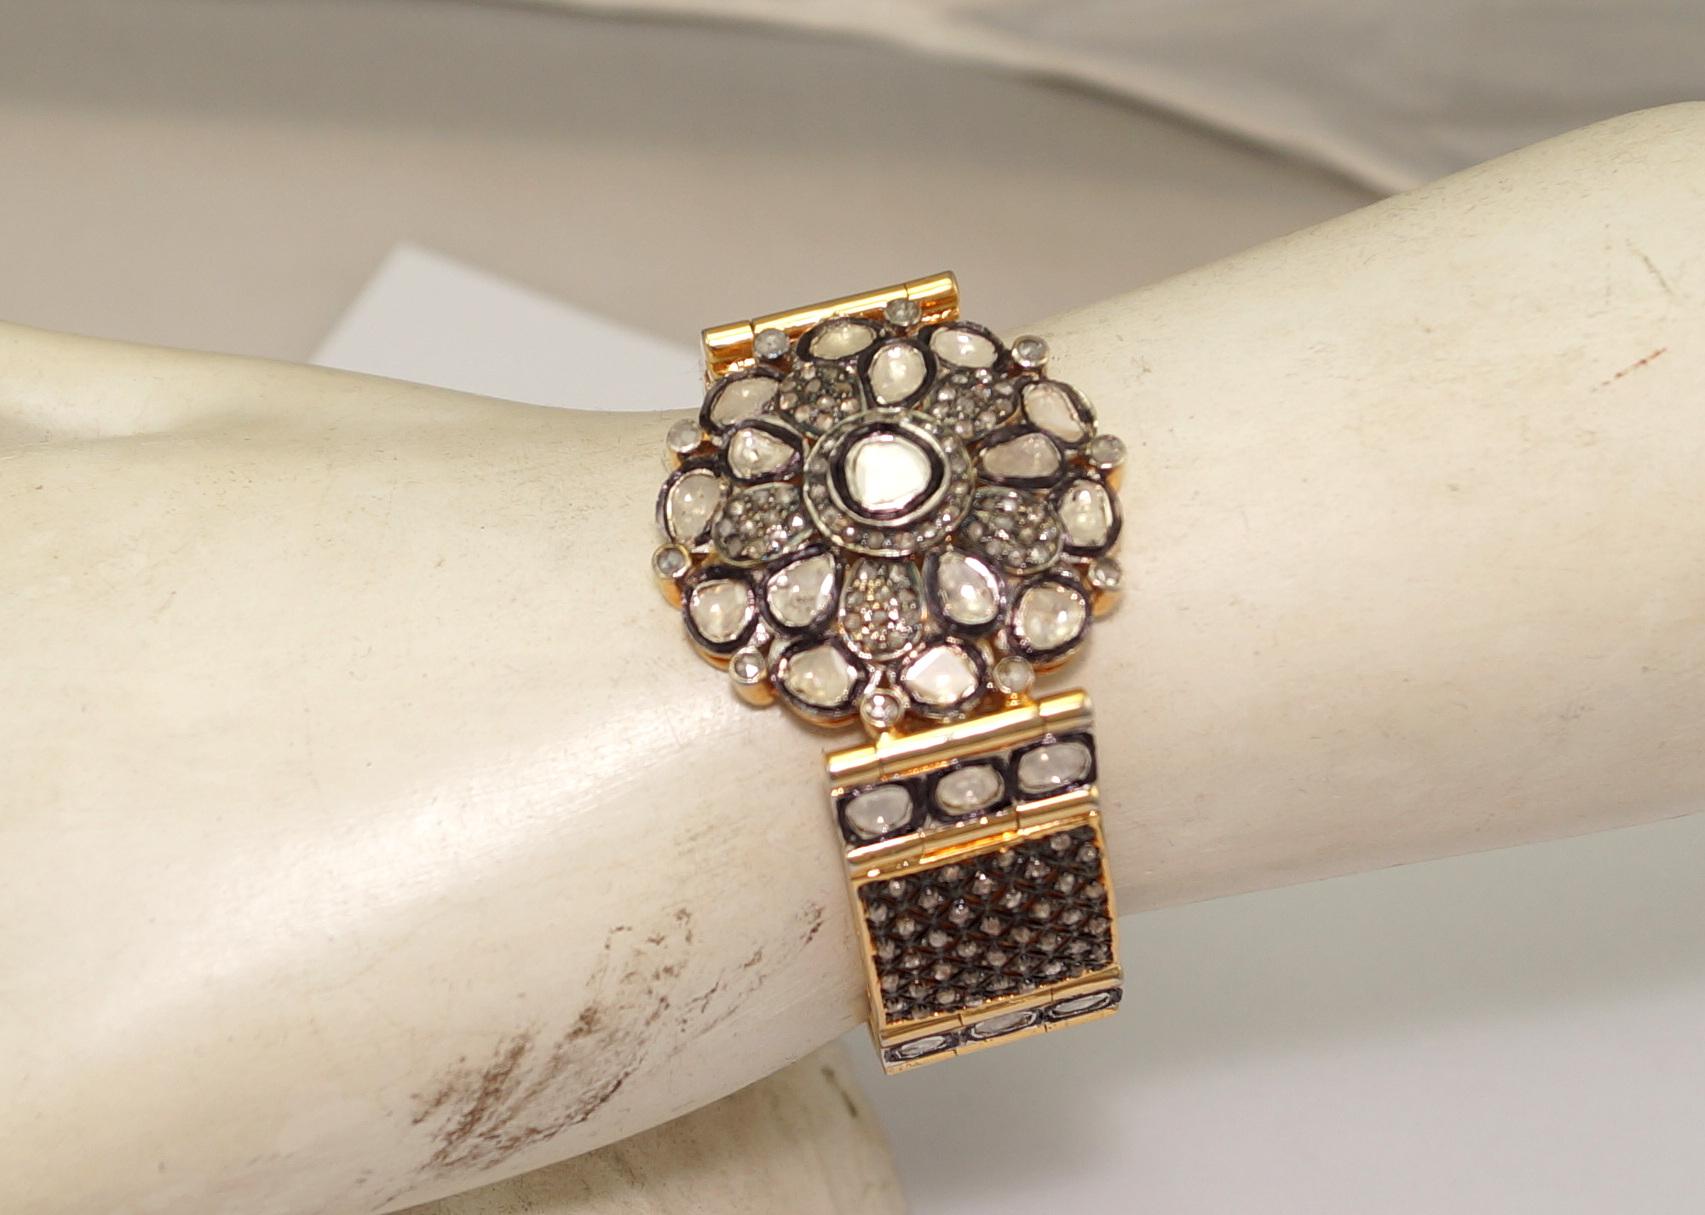 This vintage style diamond silver and yellow gold plating hinged bangle consists of:

Diamond- 12.40cts
Diamond type: Rose cut diamonds and uncut polki diamond
Diamond color:  white and tinted yellow
Diamond origin- Natural
Metal: Silver
Metal